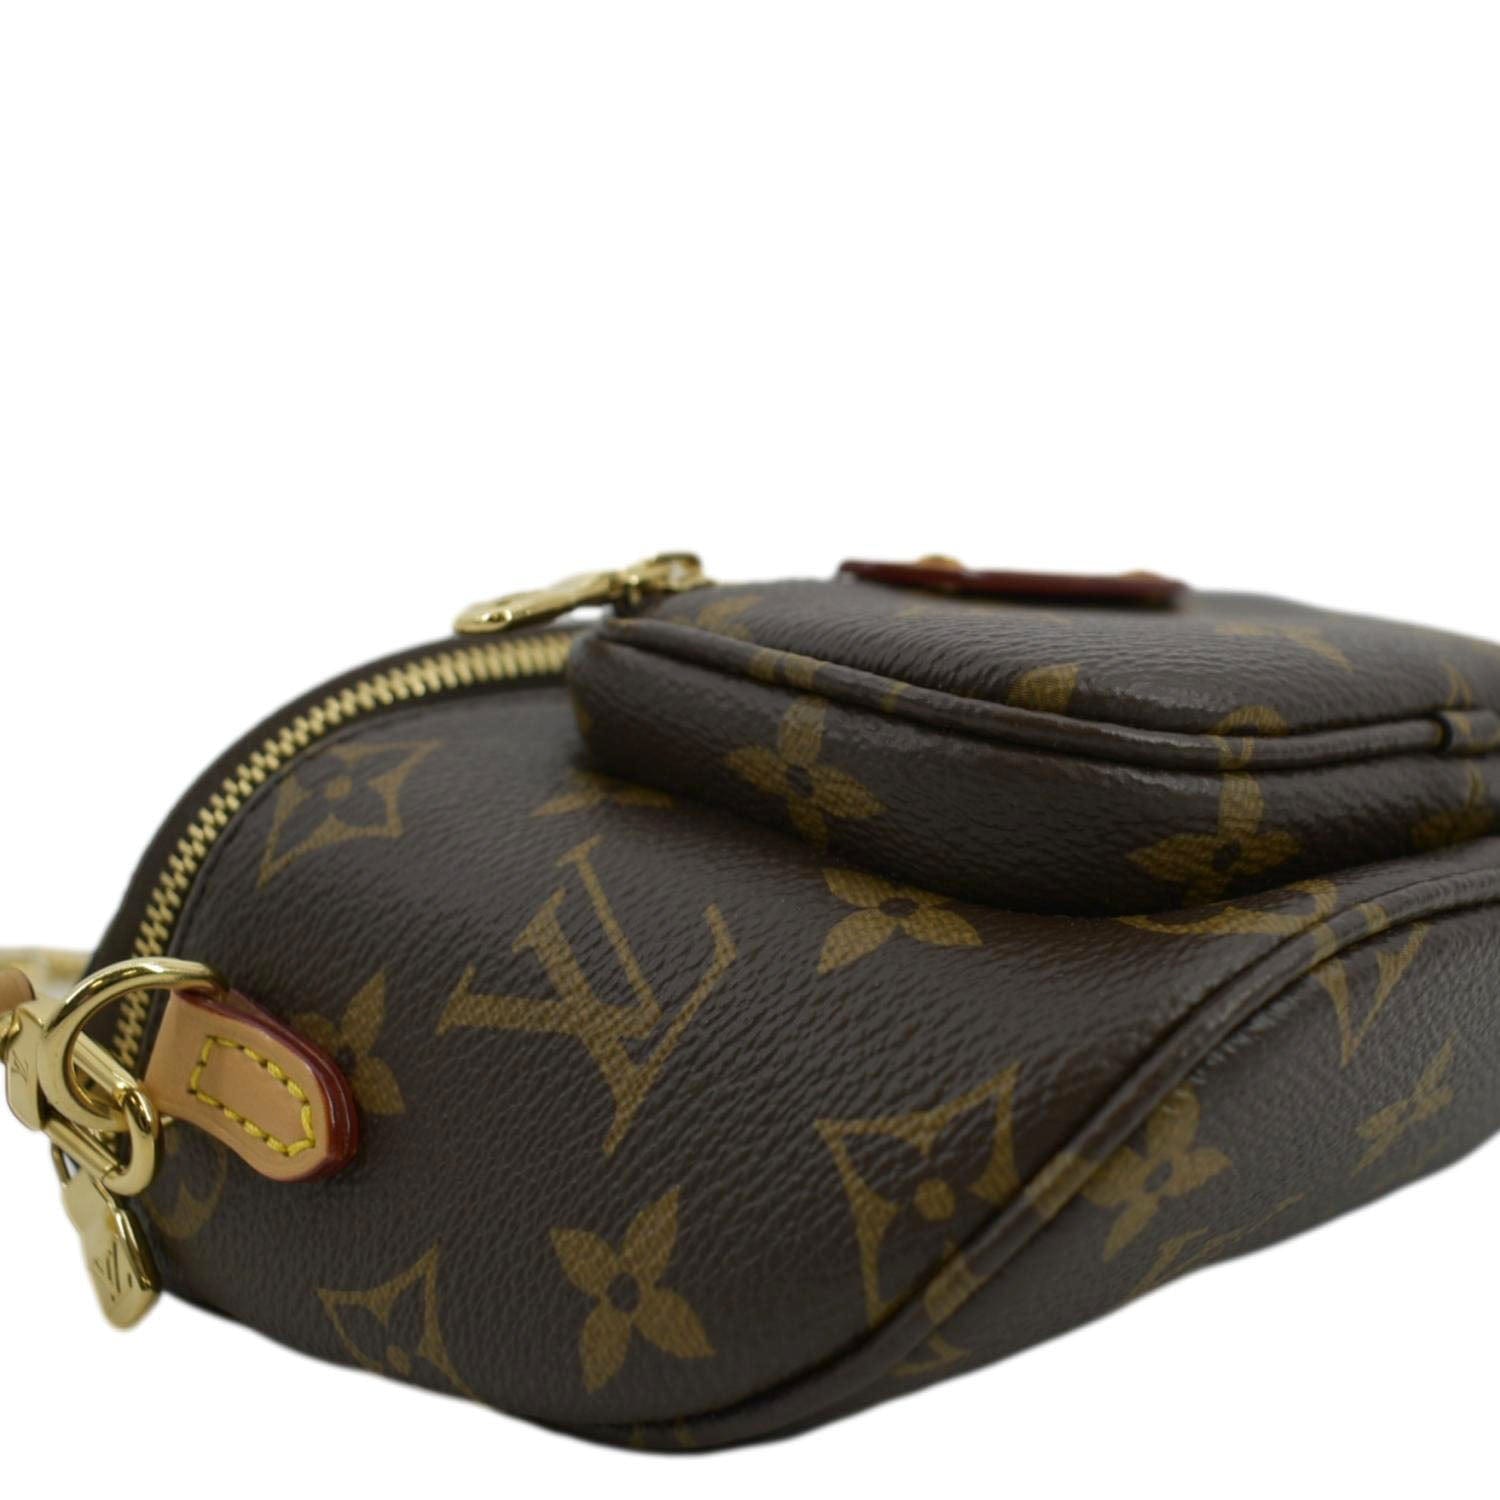 Mini Bumbag Monogram Canvas - Wallets and Small Leather Goods